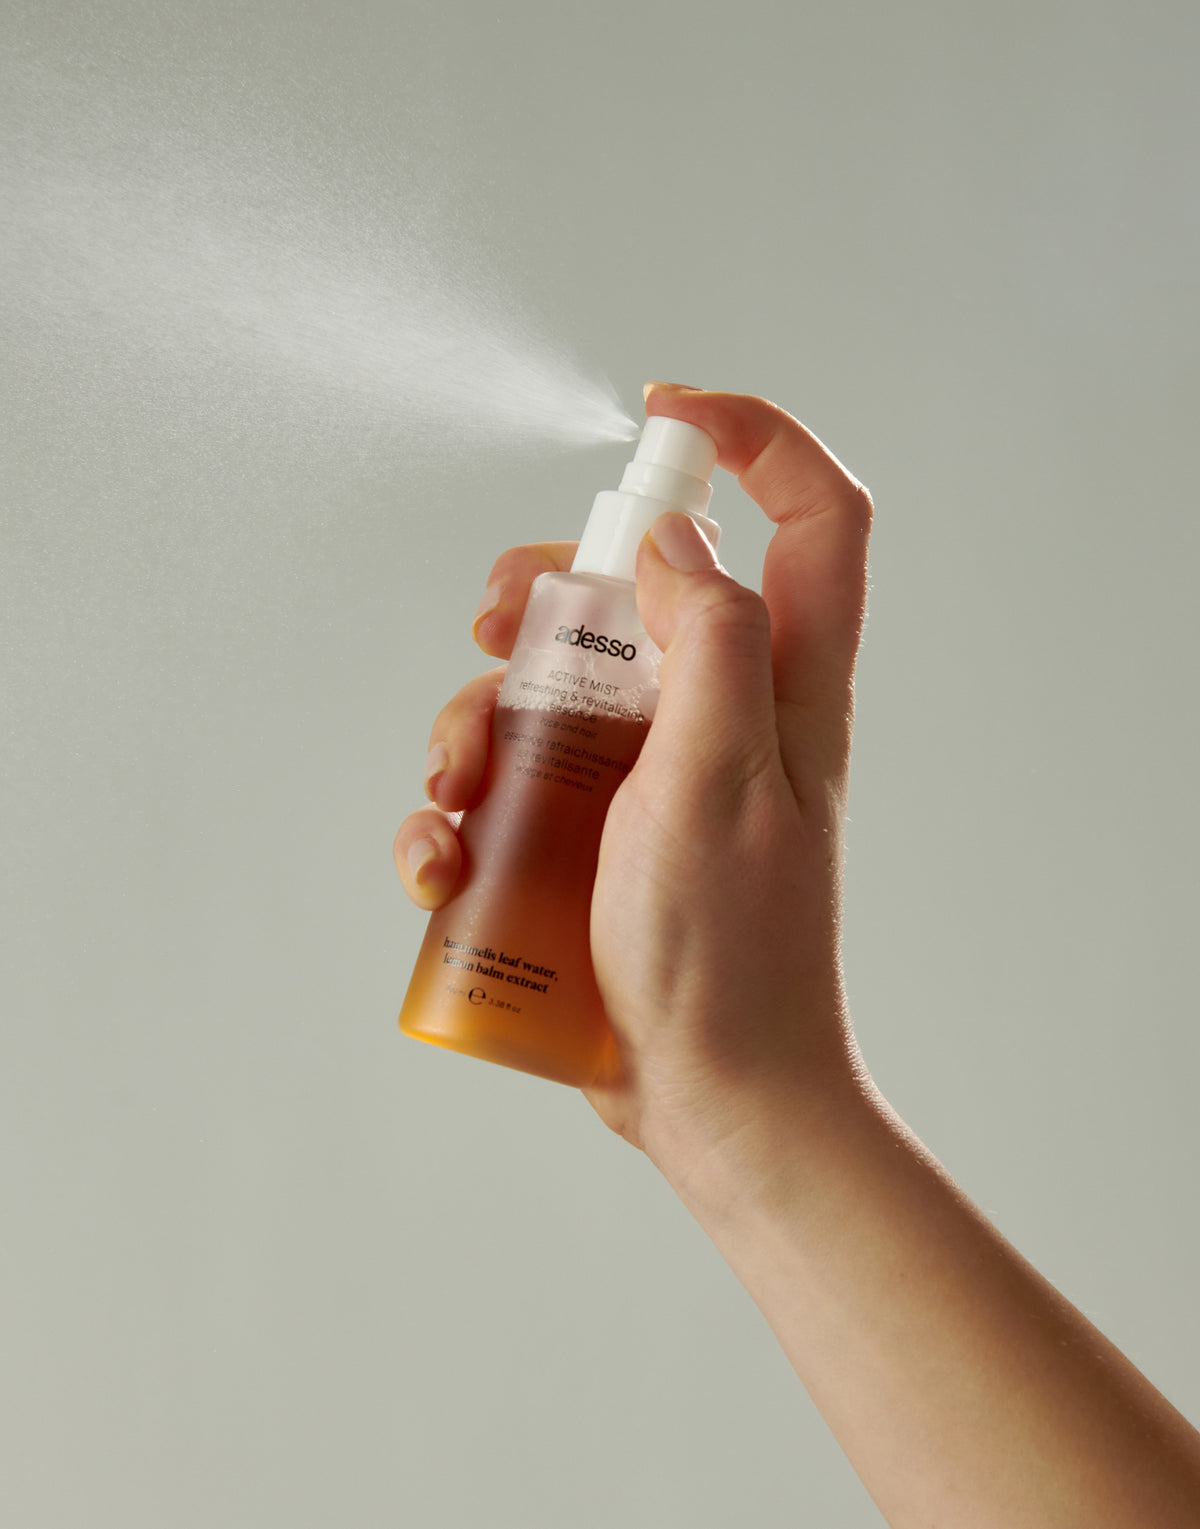 A hand spraying an Adesso skincare product 